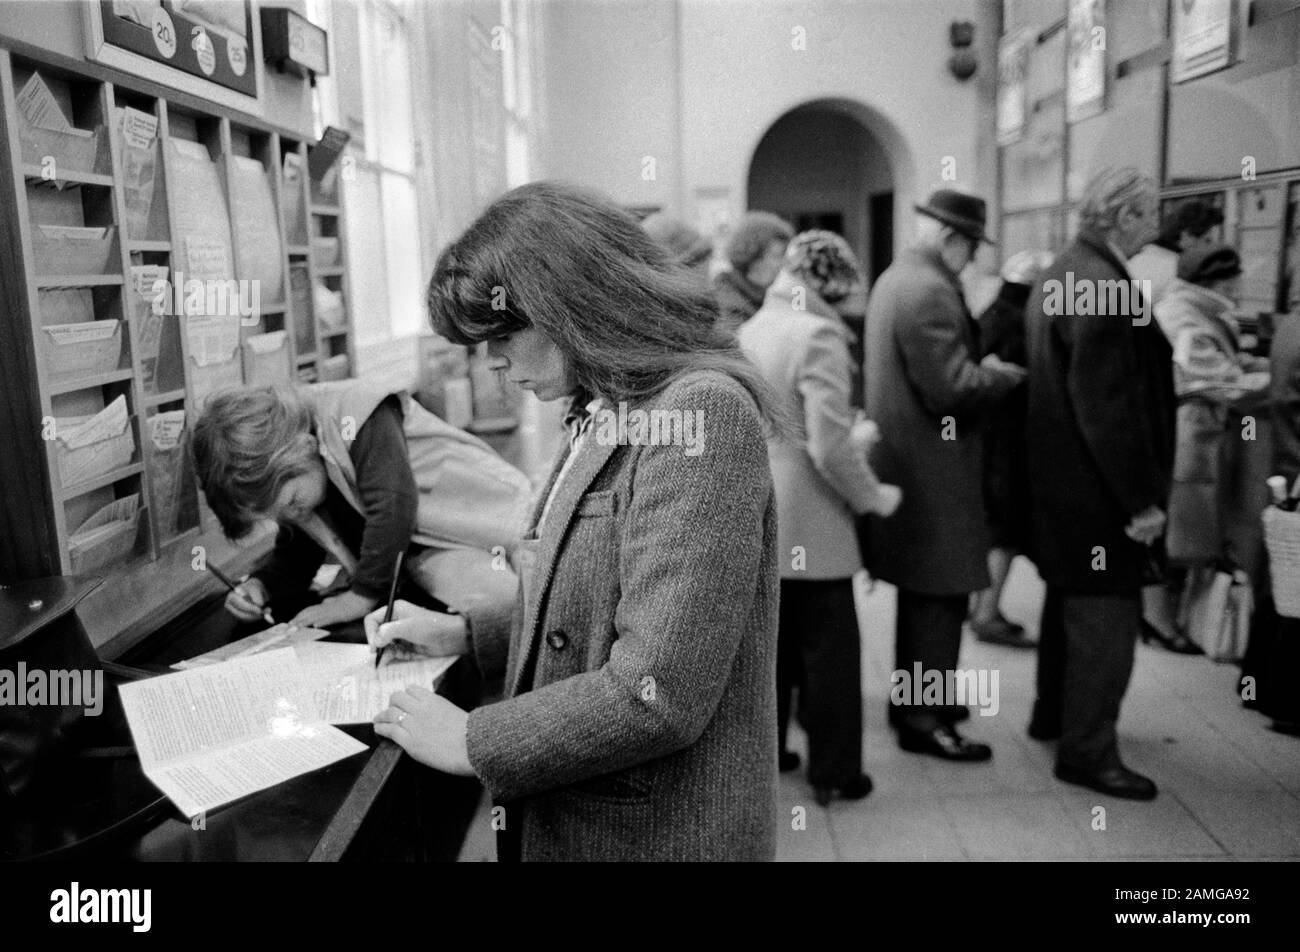 Post Office 1980s London UK. People filling in forms selecting leaflets. Mother and child going to the Post Office 1981 HOMER SYKES Stock Photo